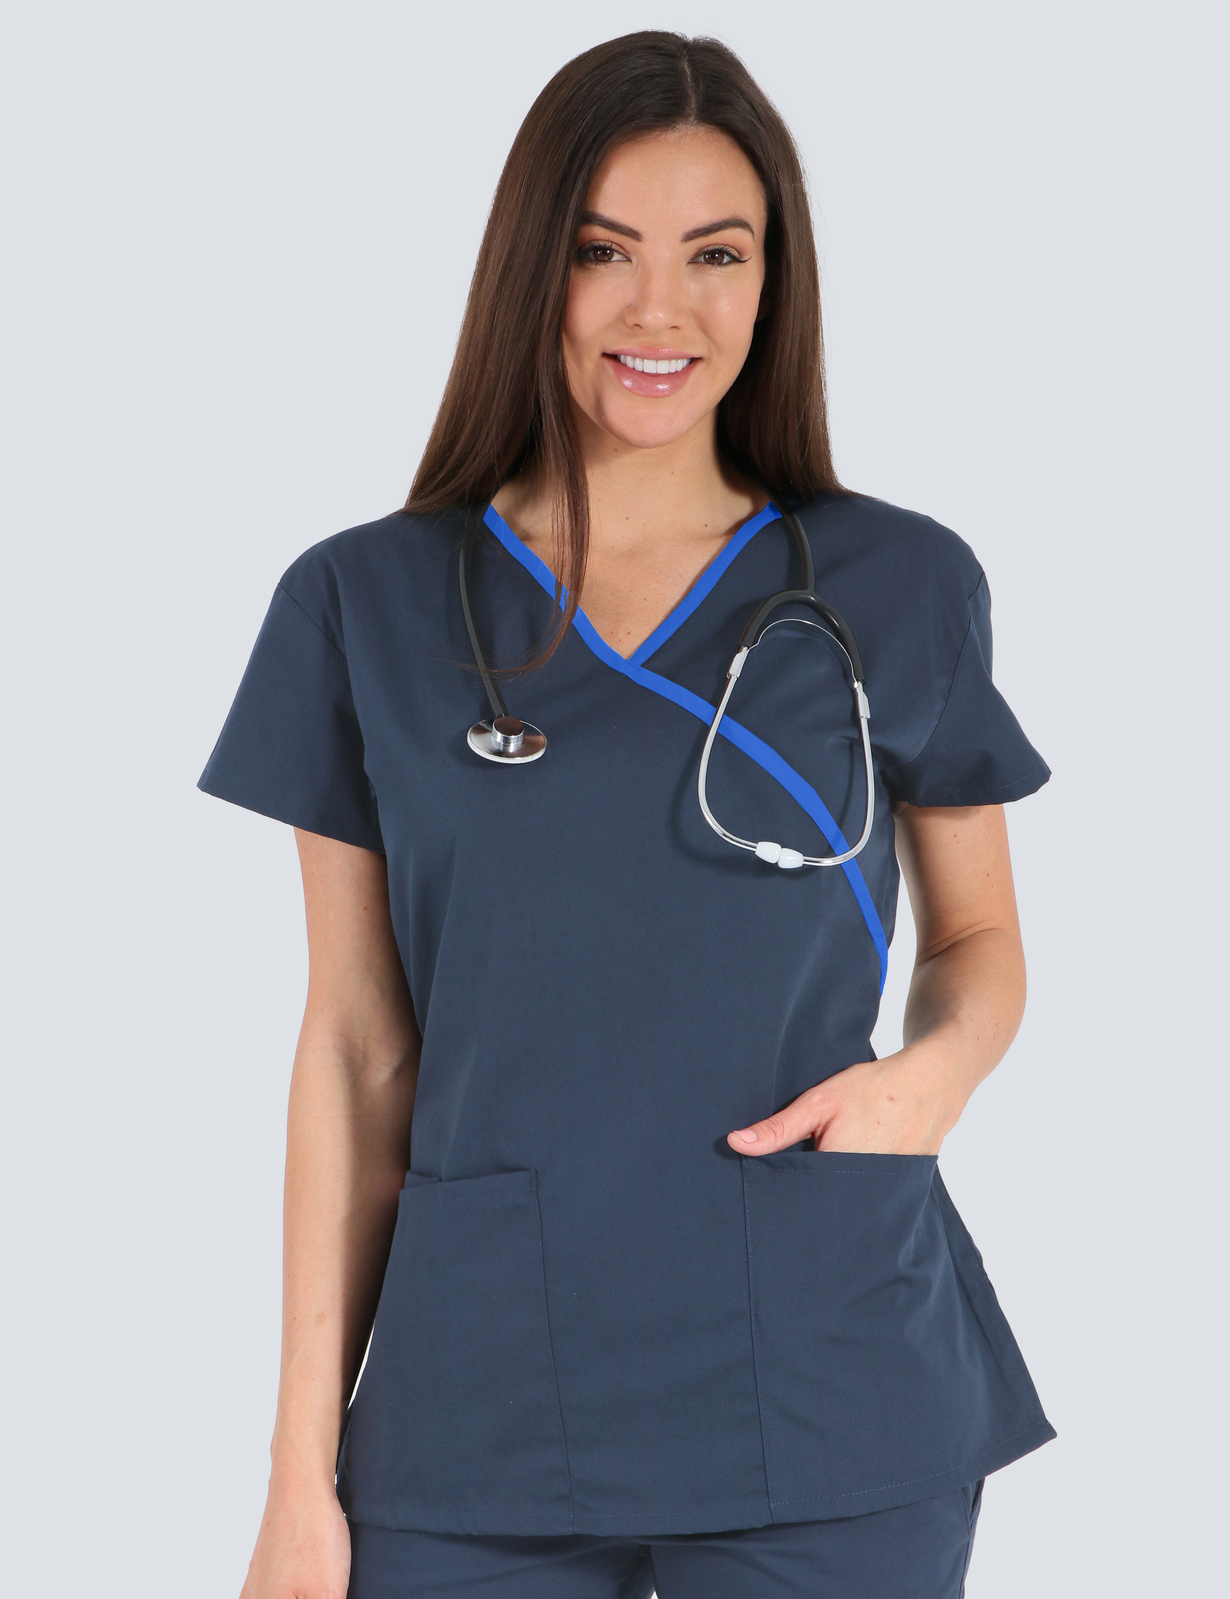 Southern Animal Health Uniform Top Only Bundle (Mockwrap top in Navy with Royal Trim incl Logos)